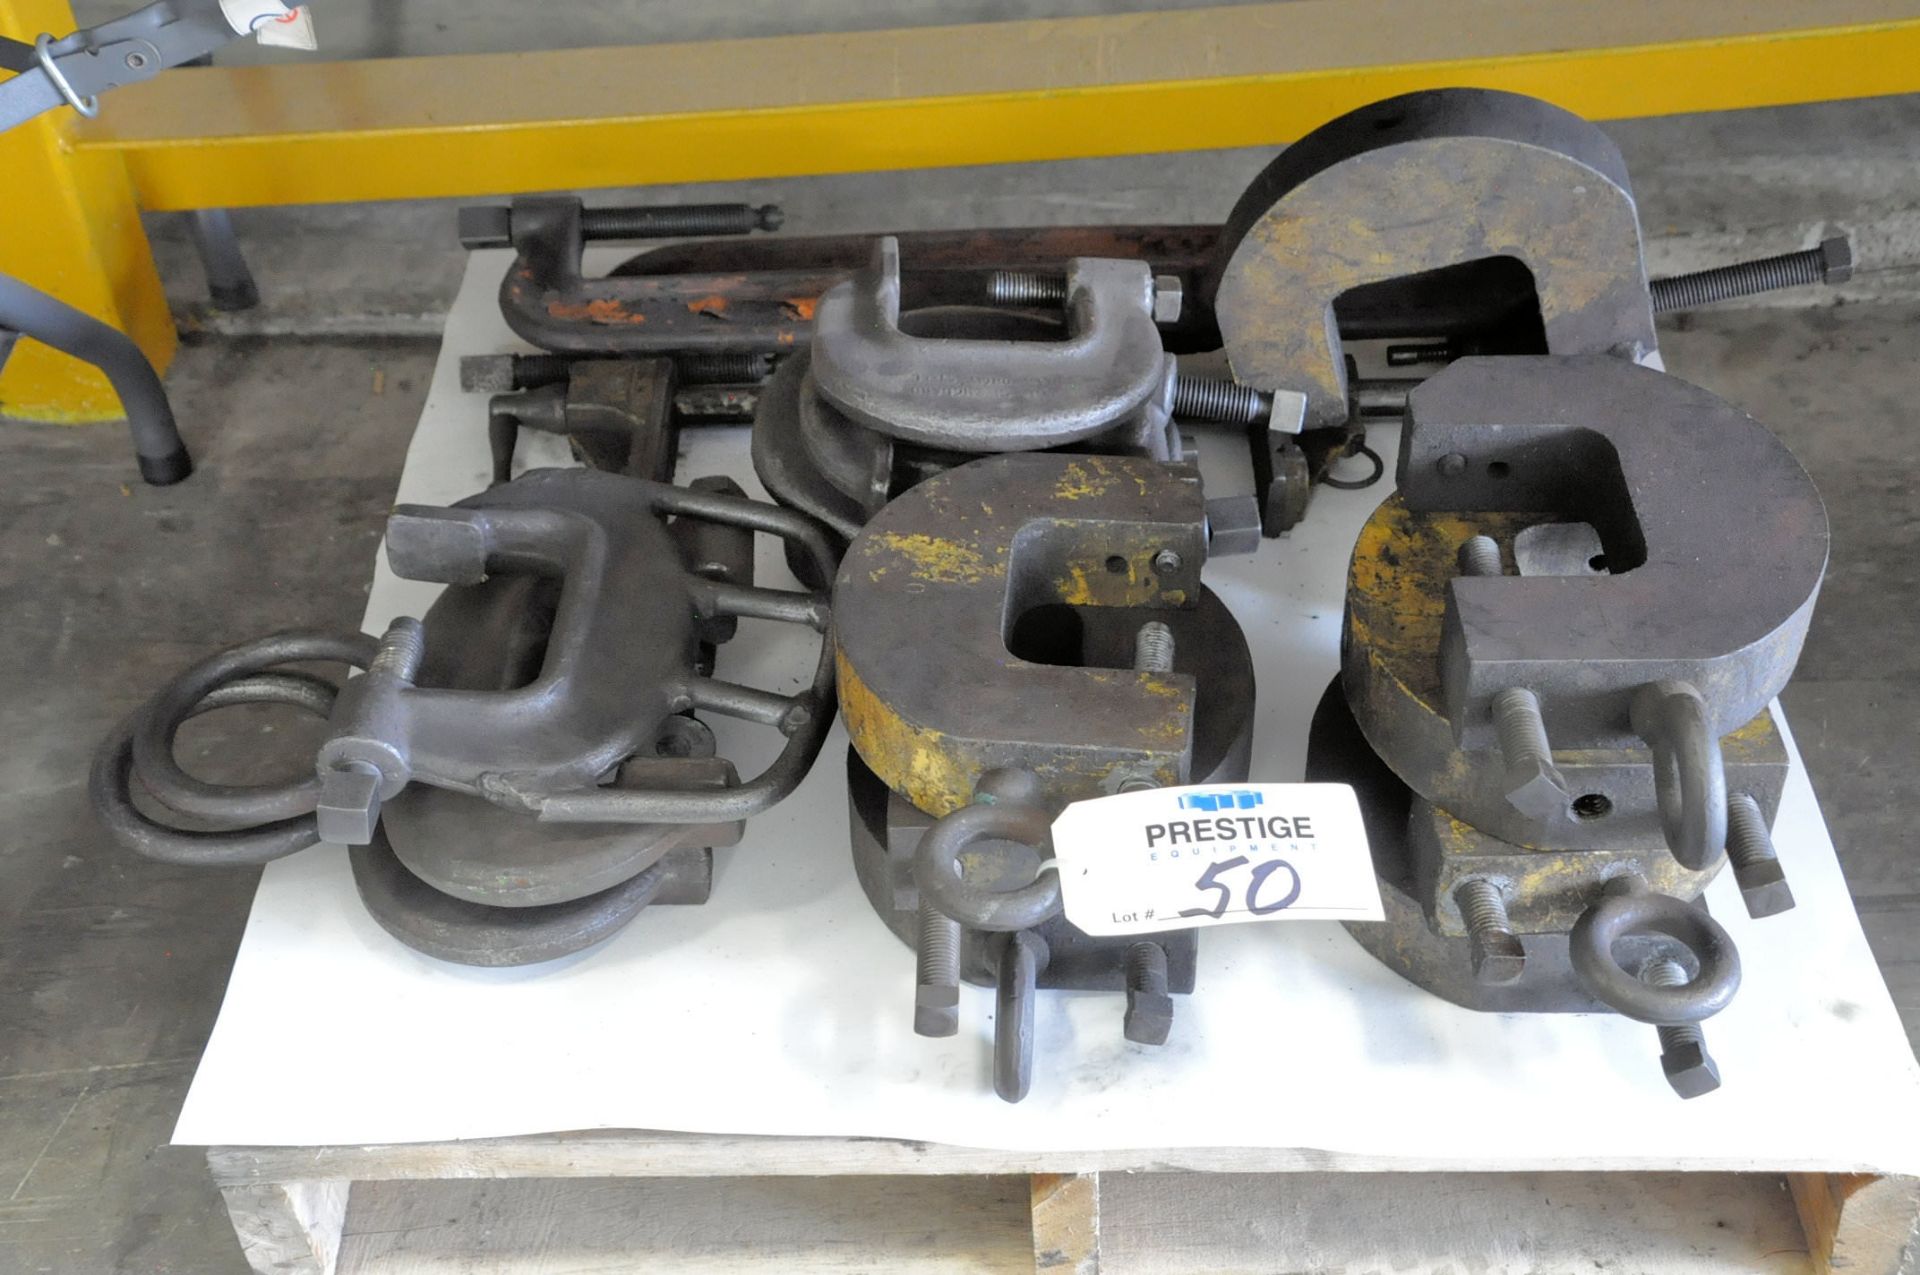 Lot-Various Die Clamps and Custom Clamps on (1) Pallet Under (1) Table, (Bldg 1)